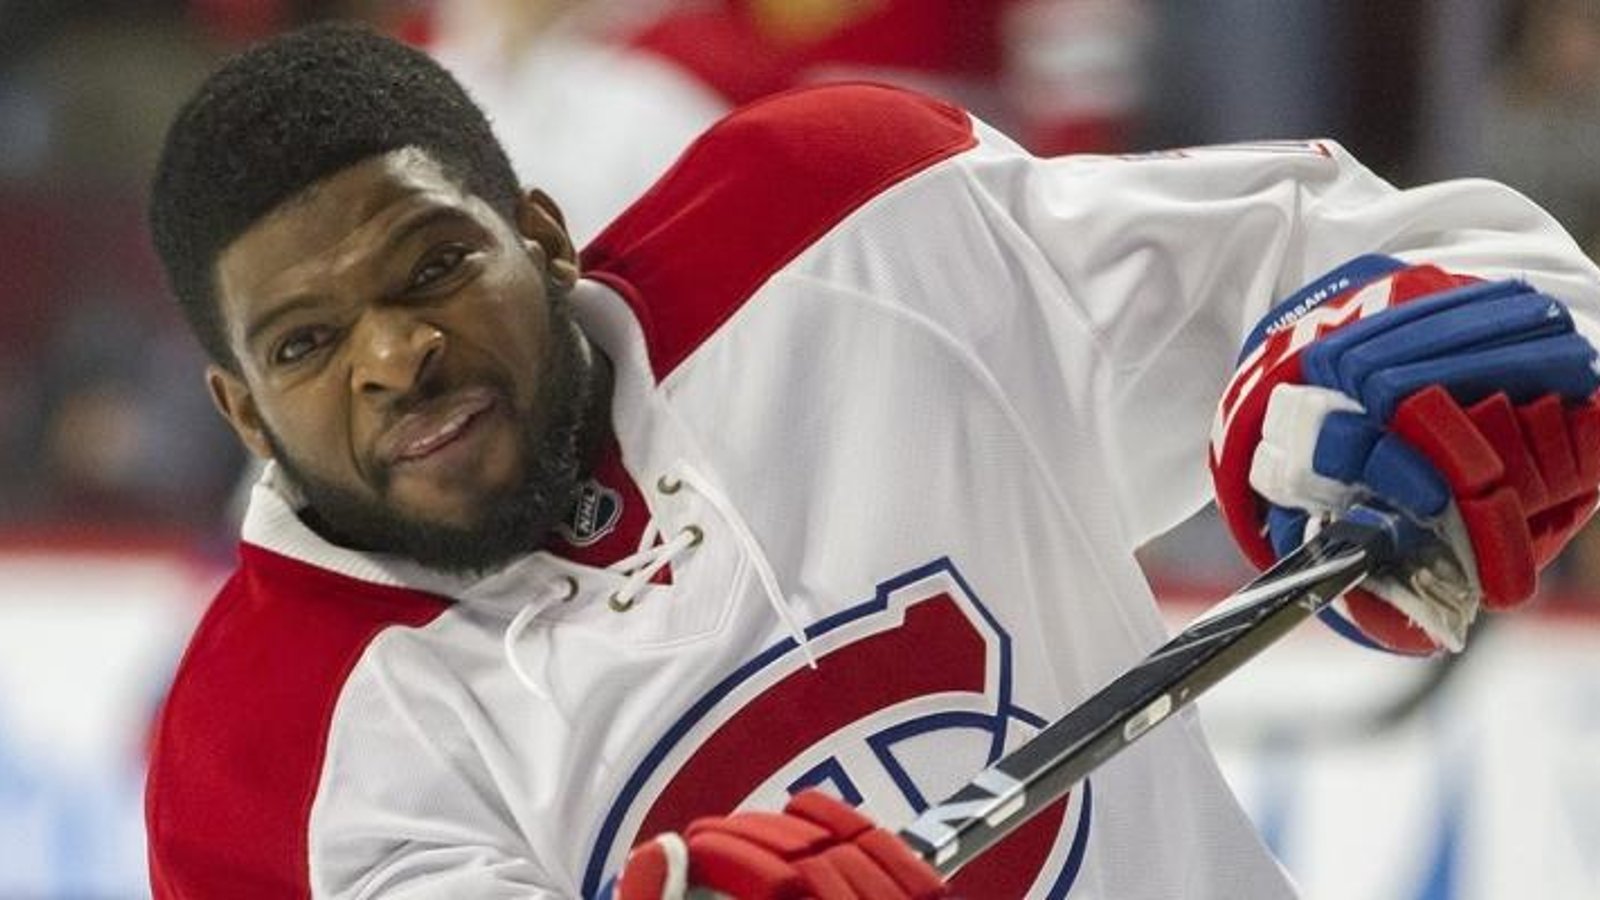 Breaking: Source confirms ugly rumors involving the Canadiens that surfaced yesterday.